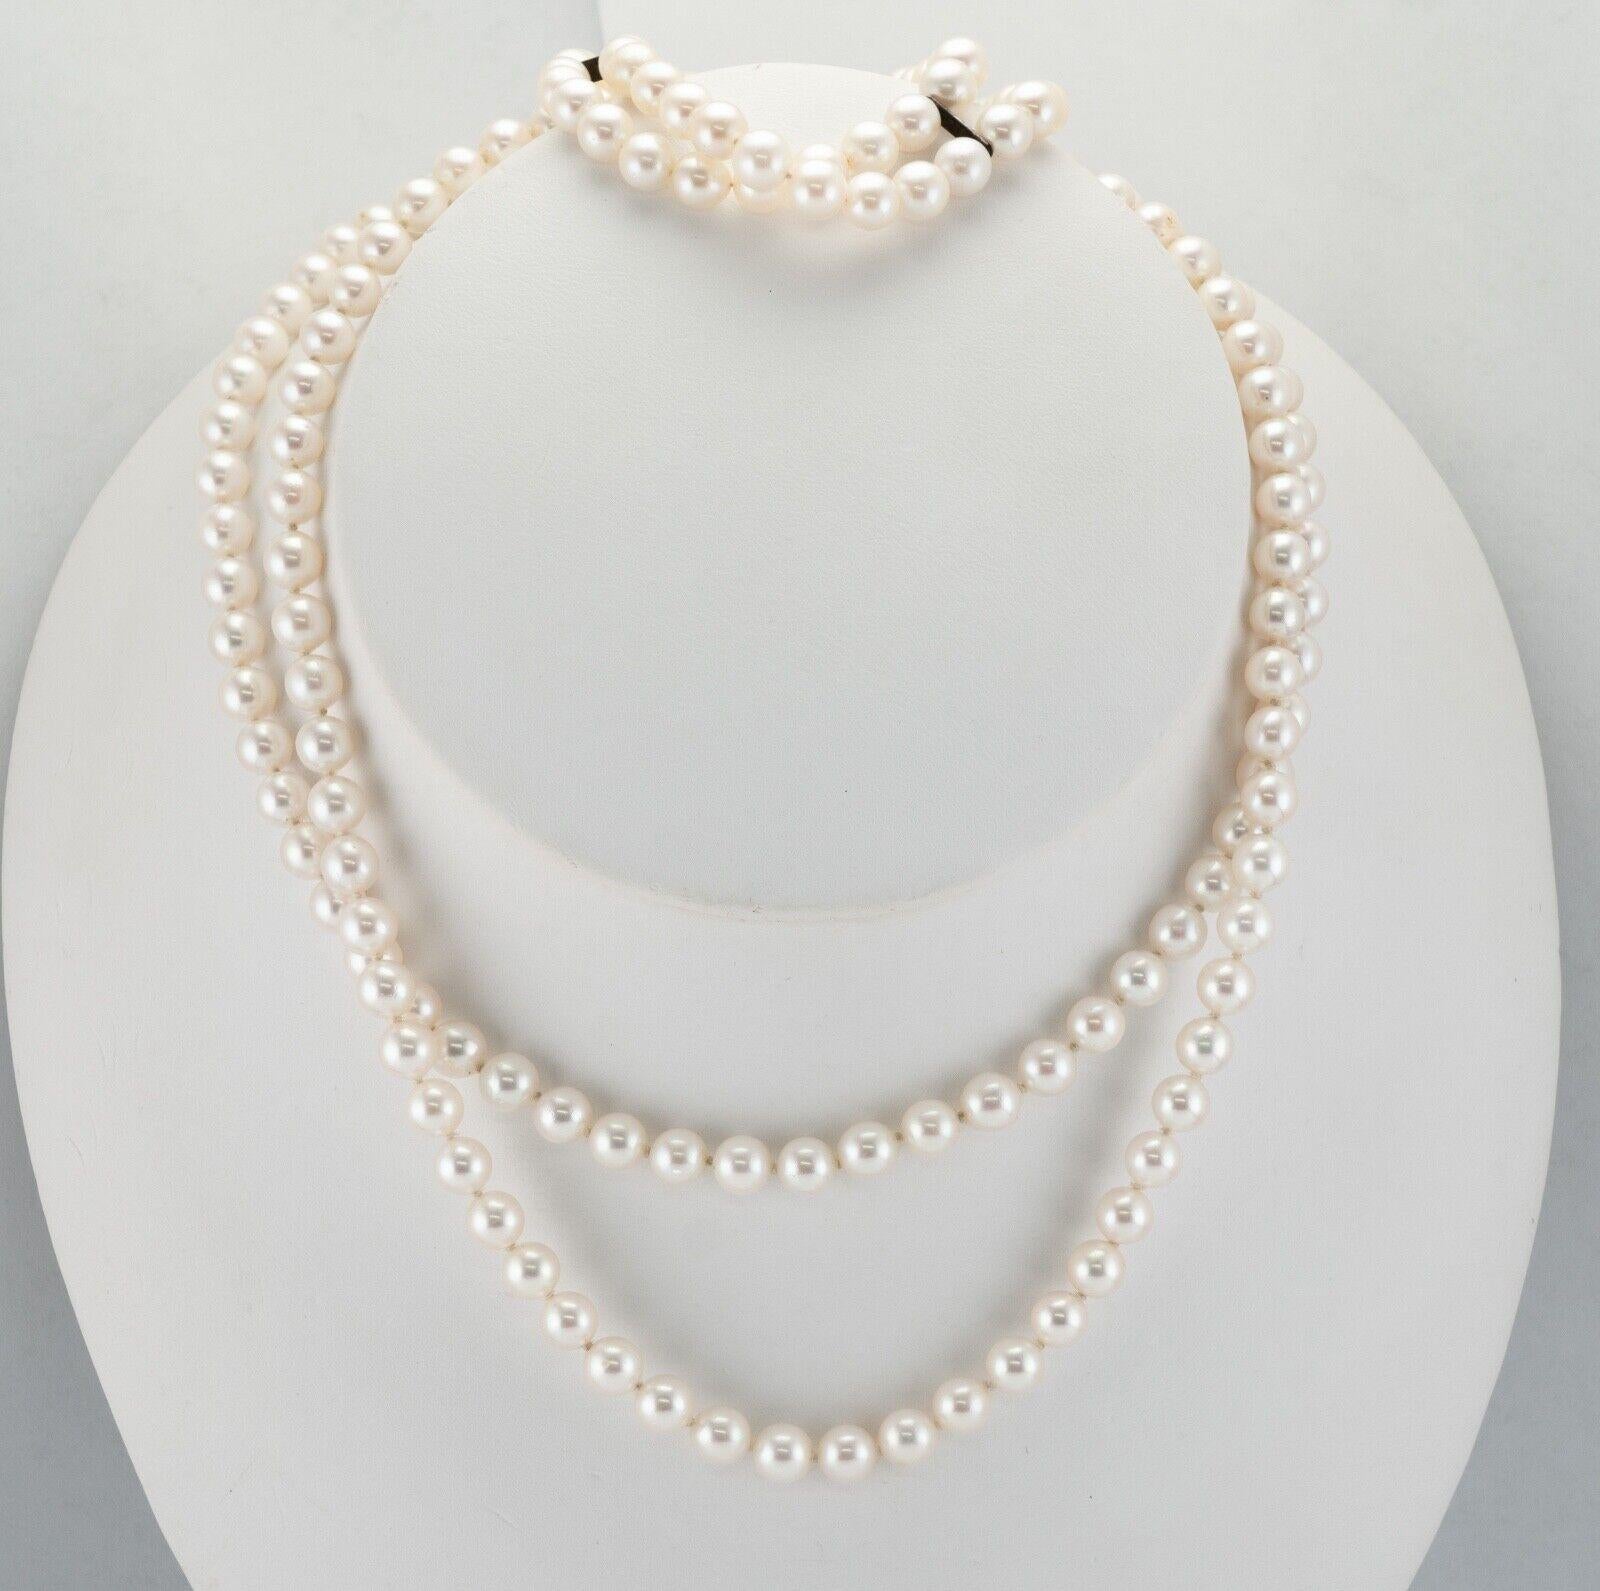 Mikimoto Pearl Necklace Pearl Bracelet Set Sterling Silver

You will treasure this outstanding authentic Vintage MIKIMOTO Sterling silver pearl necklace and bracelet set forever. 
The necklace has two rows of 5.5x6mm pearls, total 122 pearls. The